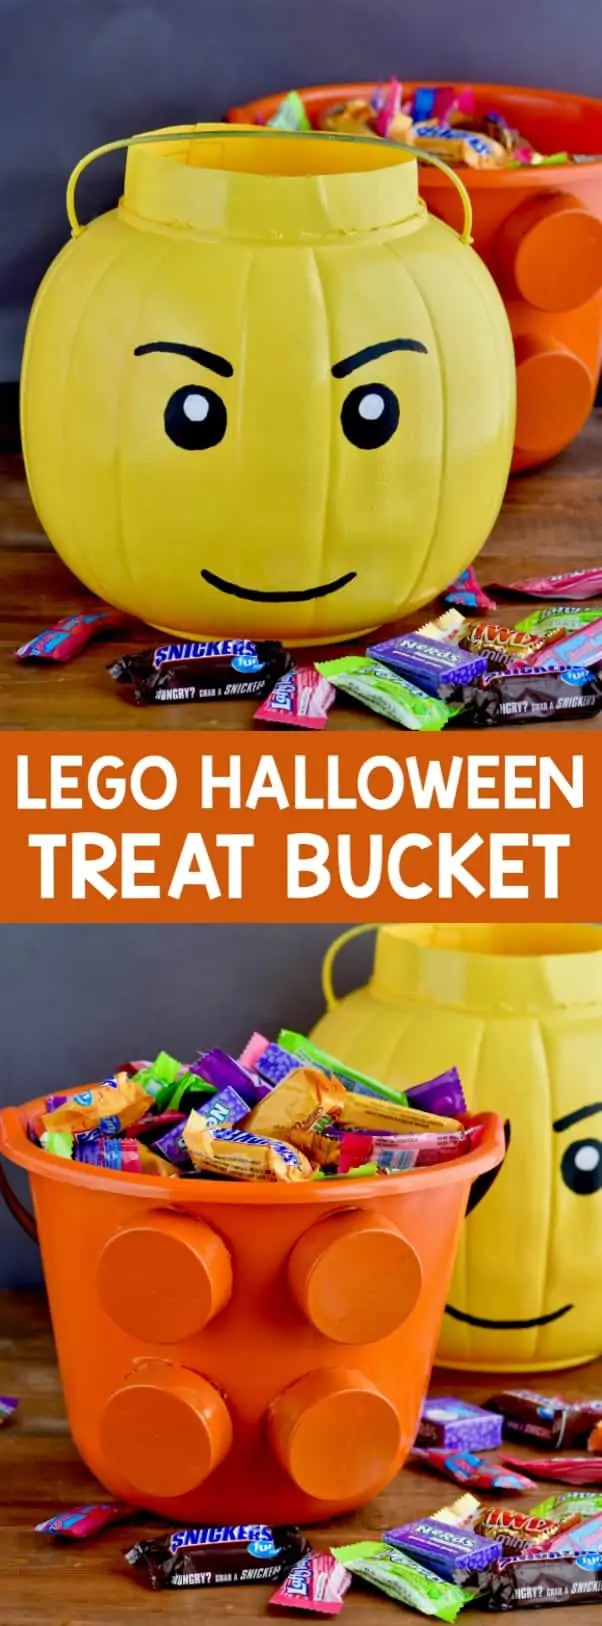 Two Halloween Treat Buckets: one shaped as a lego man head and the other into a lego piece.